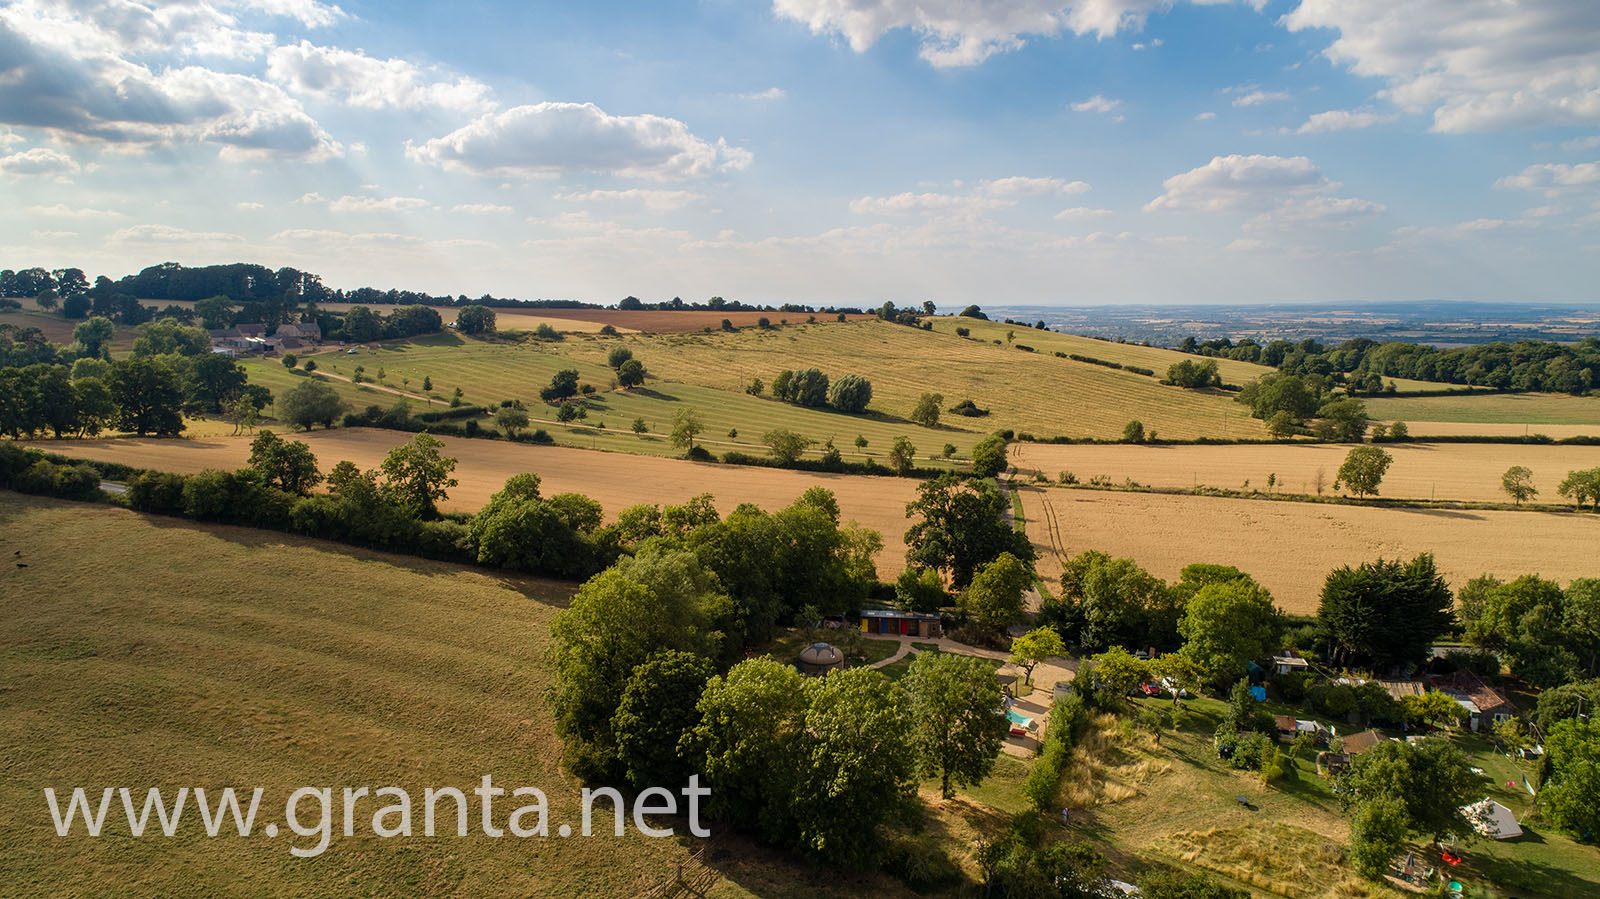 Drone photo of Campden Yurts campsite and the surrounding countryside